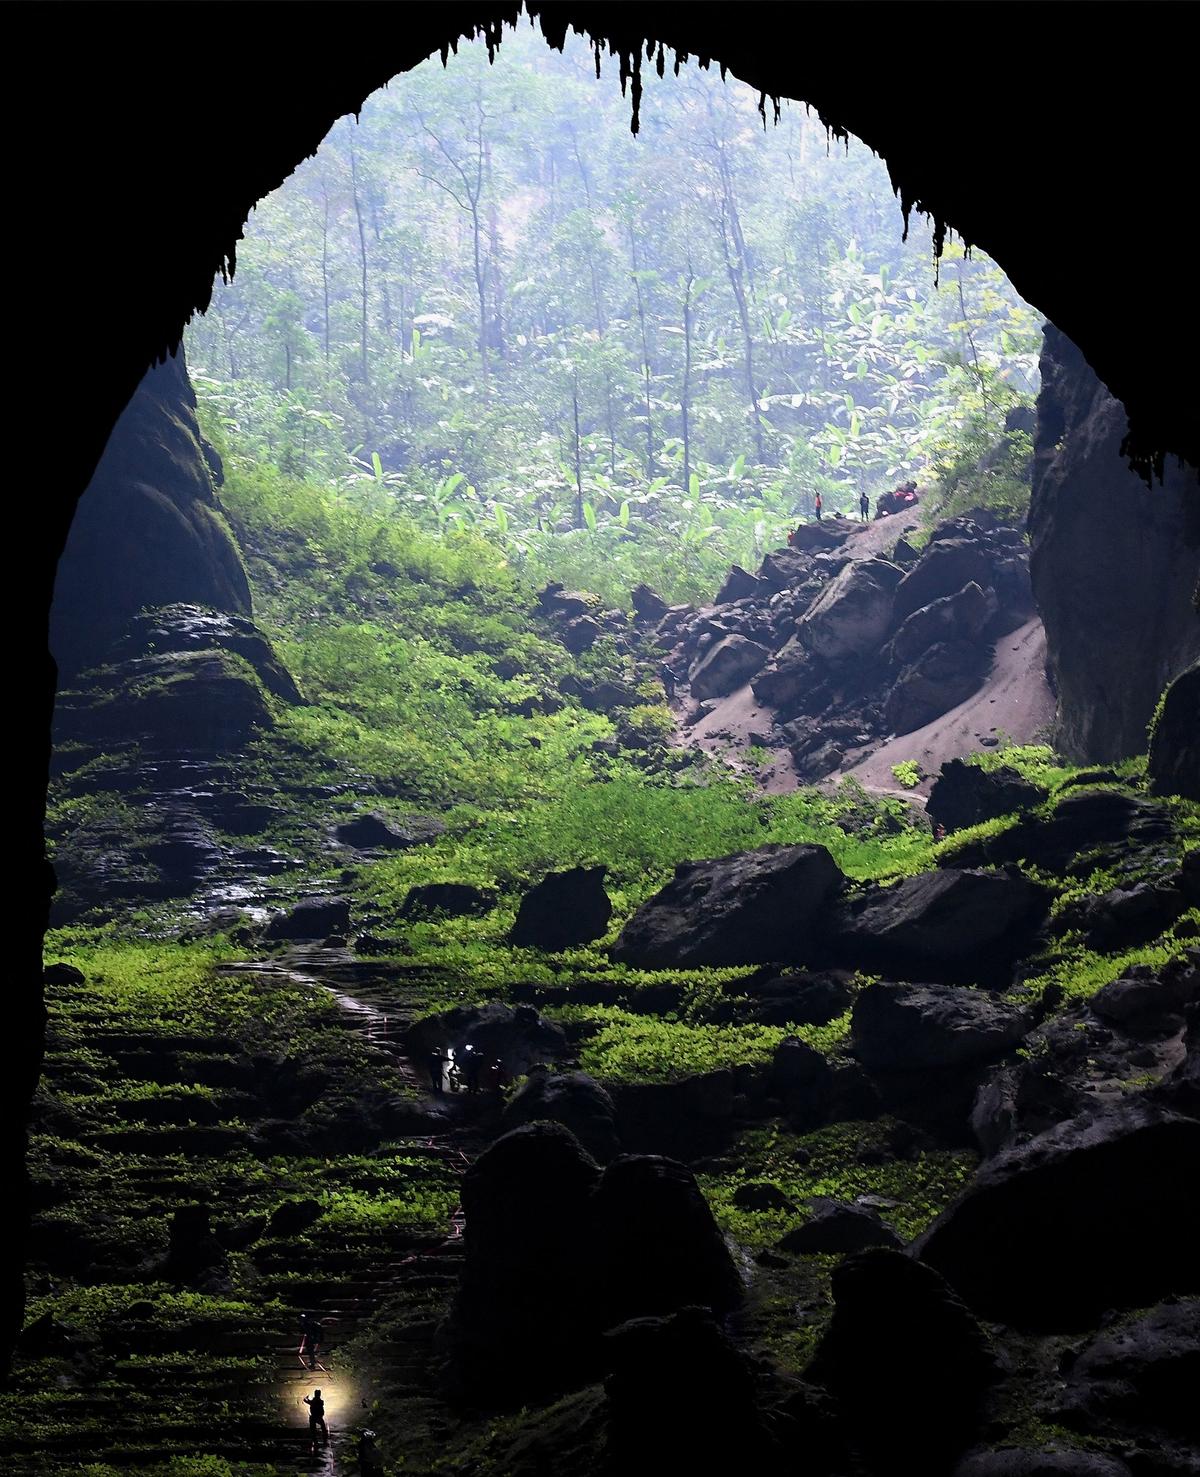 Son Doong cave, located in Quang Binh province in central Vietnam. (Nhac Nguyen/AFP via Getty Images)